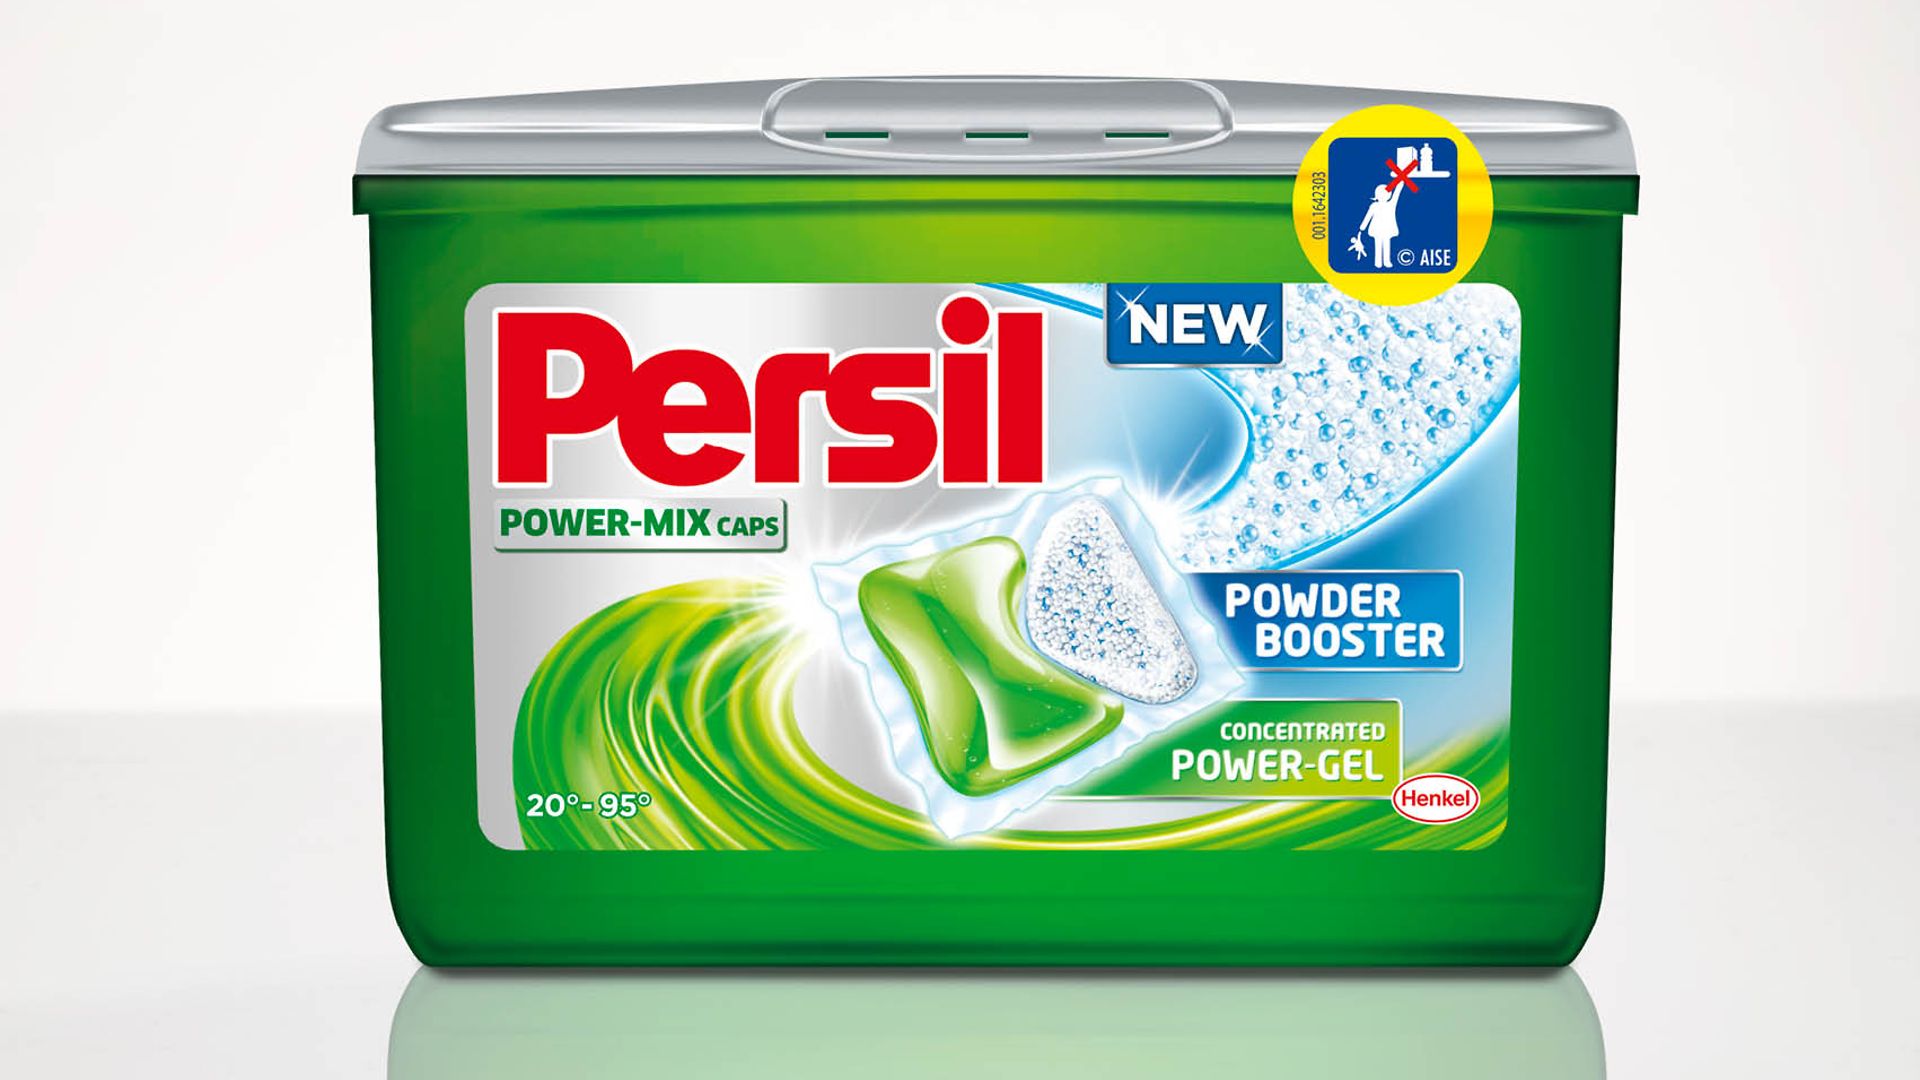 The new Persil Power-Mix Caps